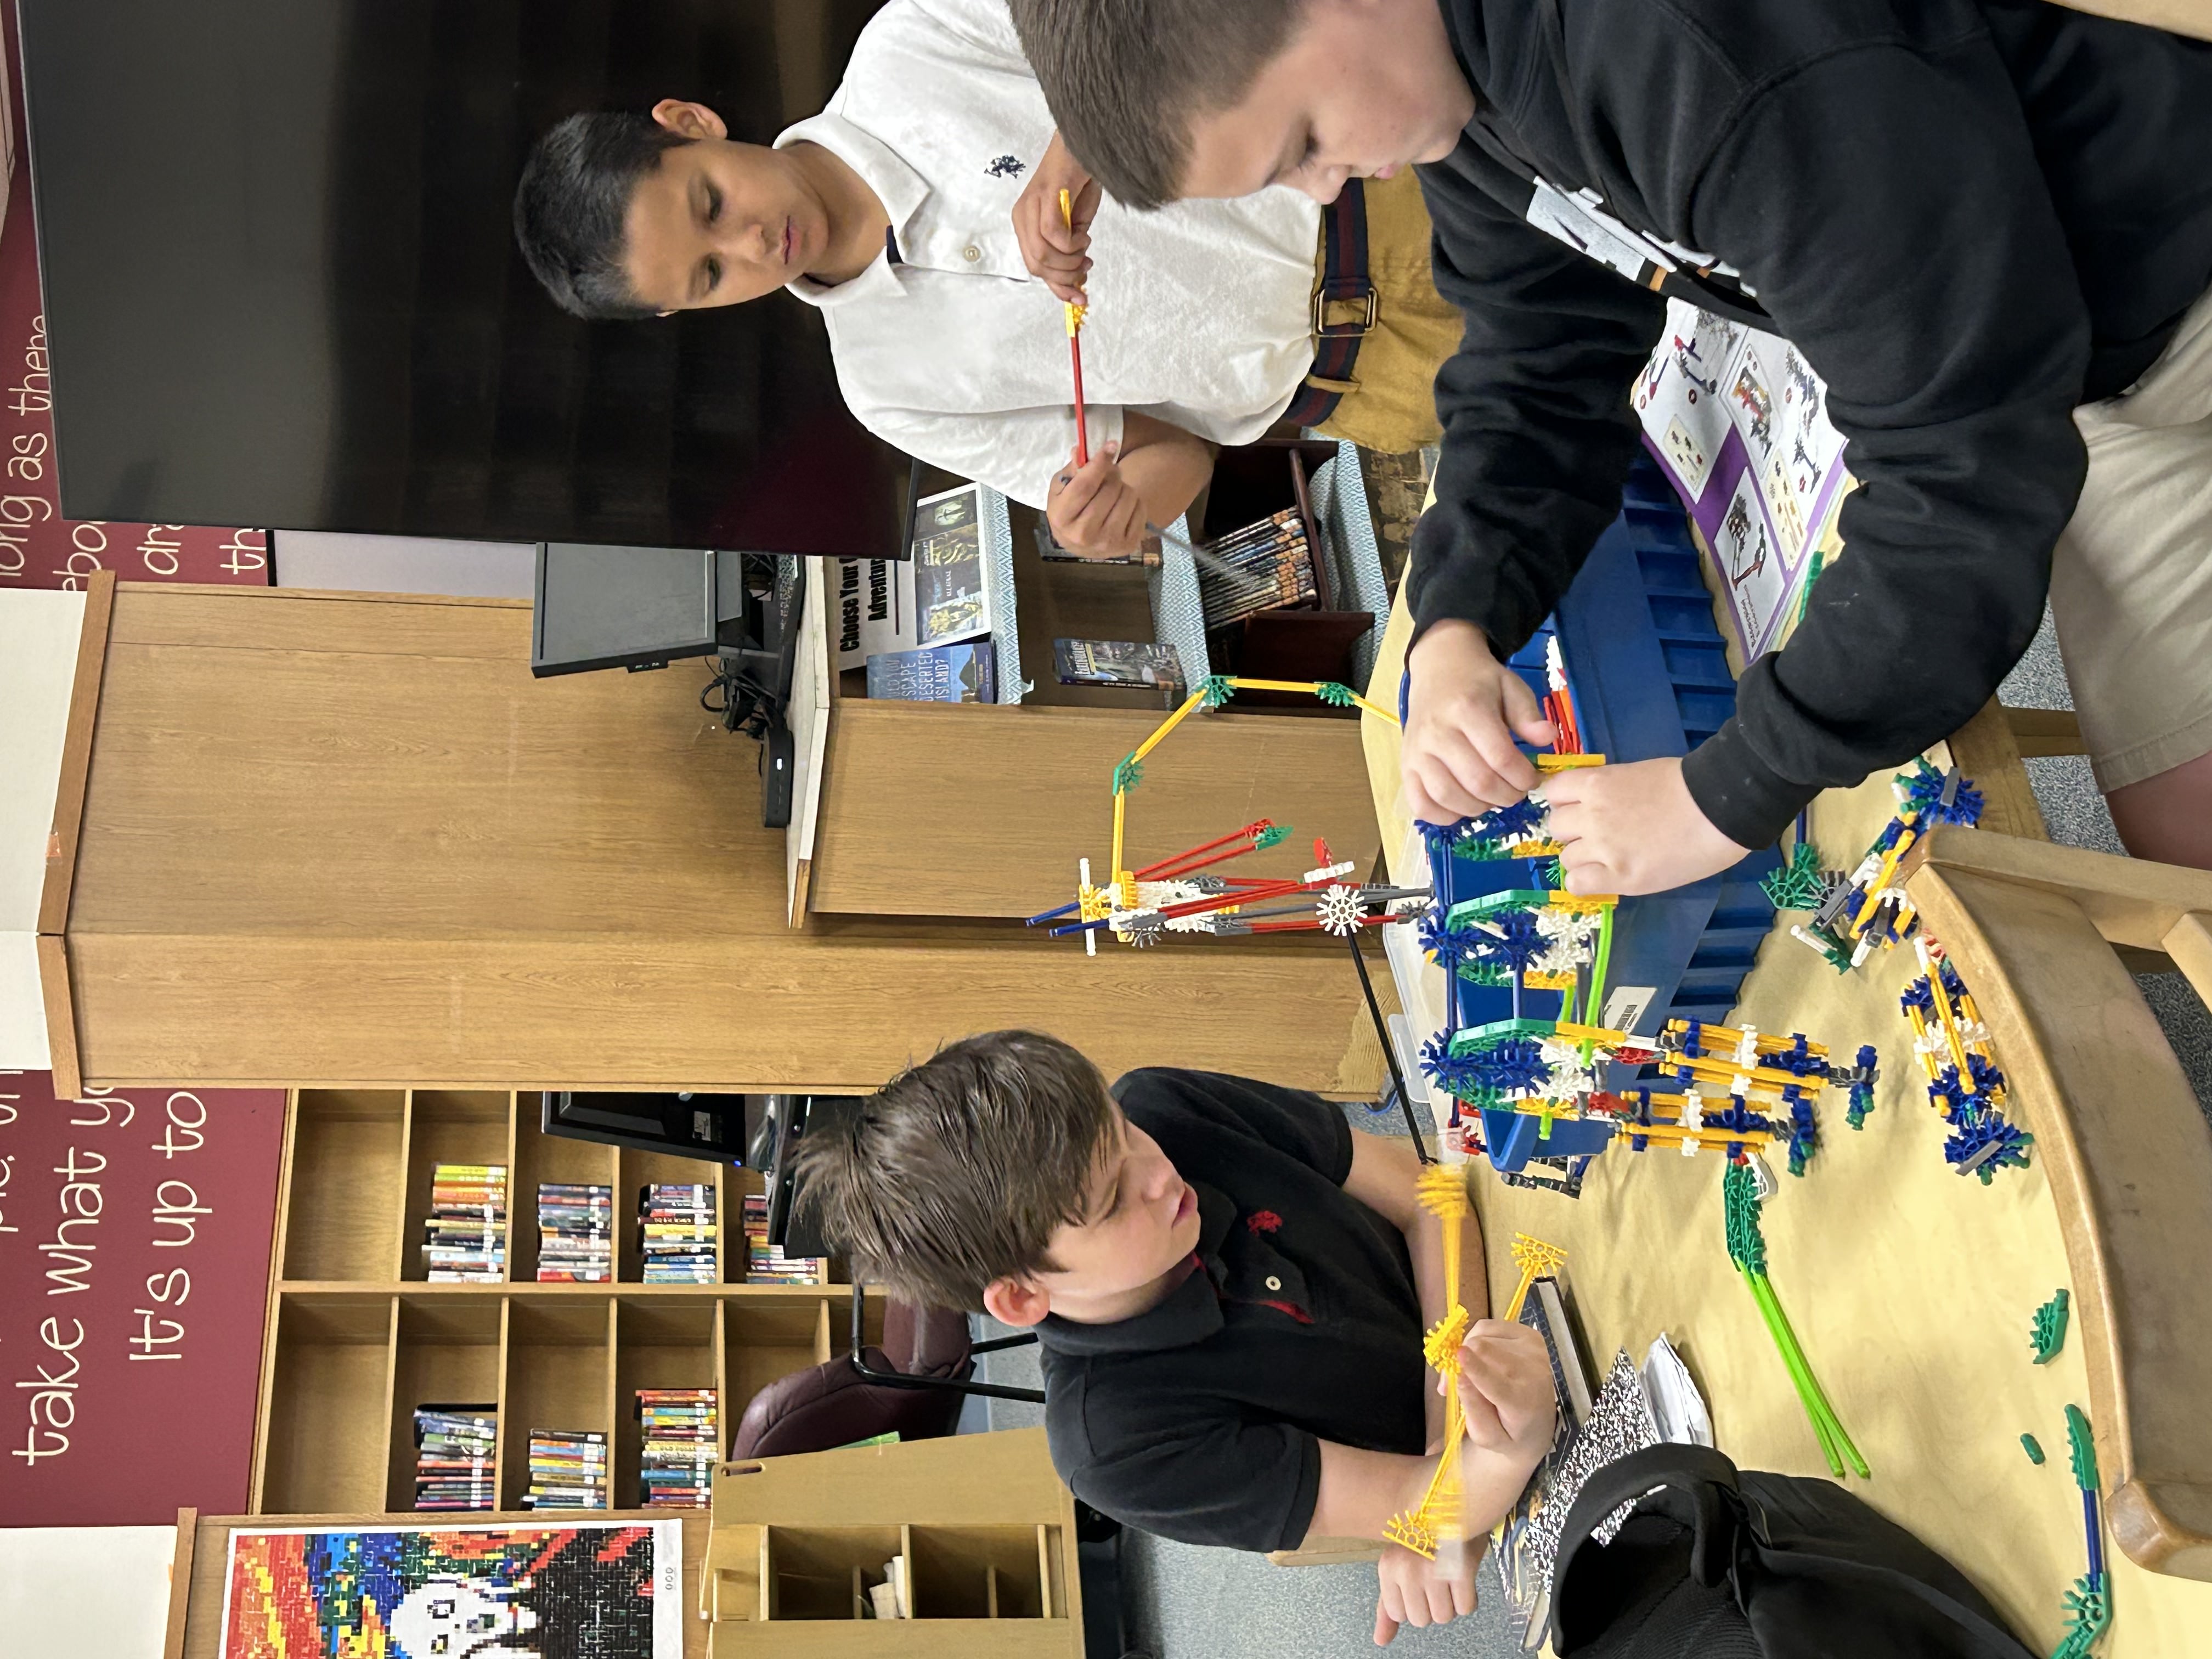 Students working with Knex building toys